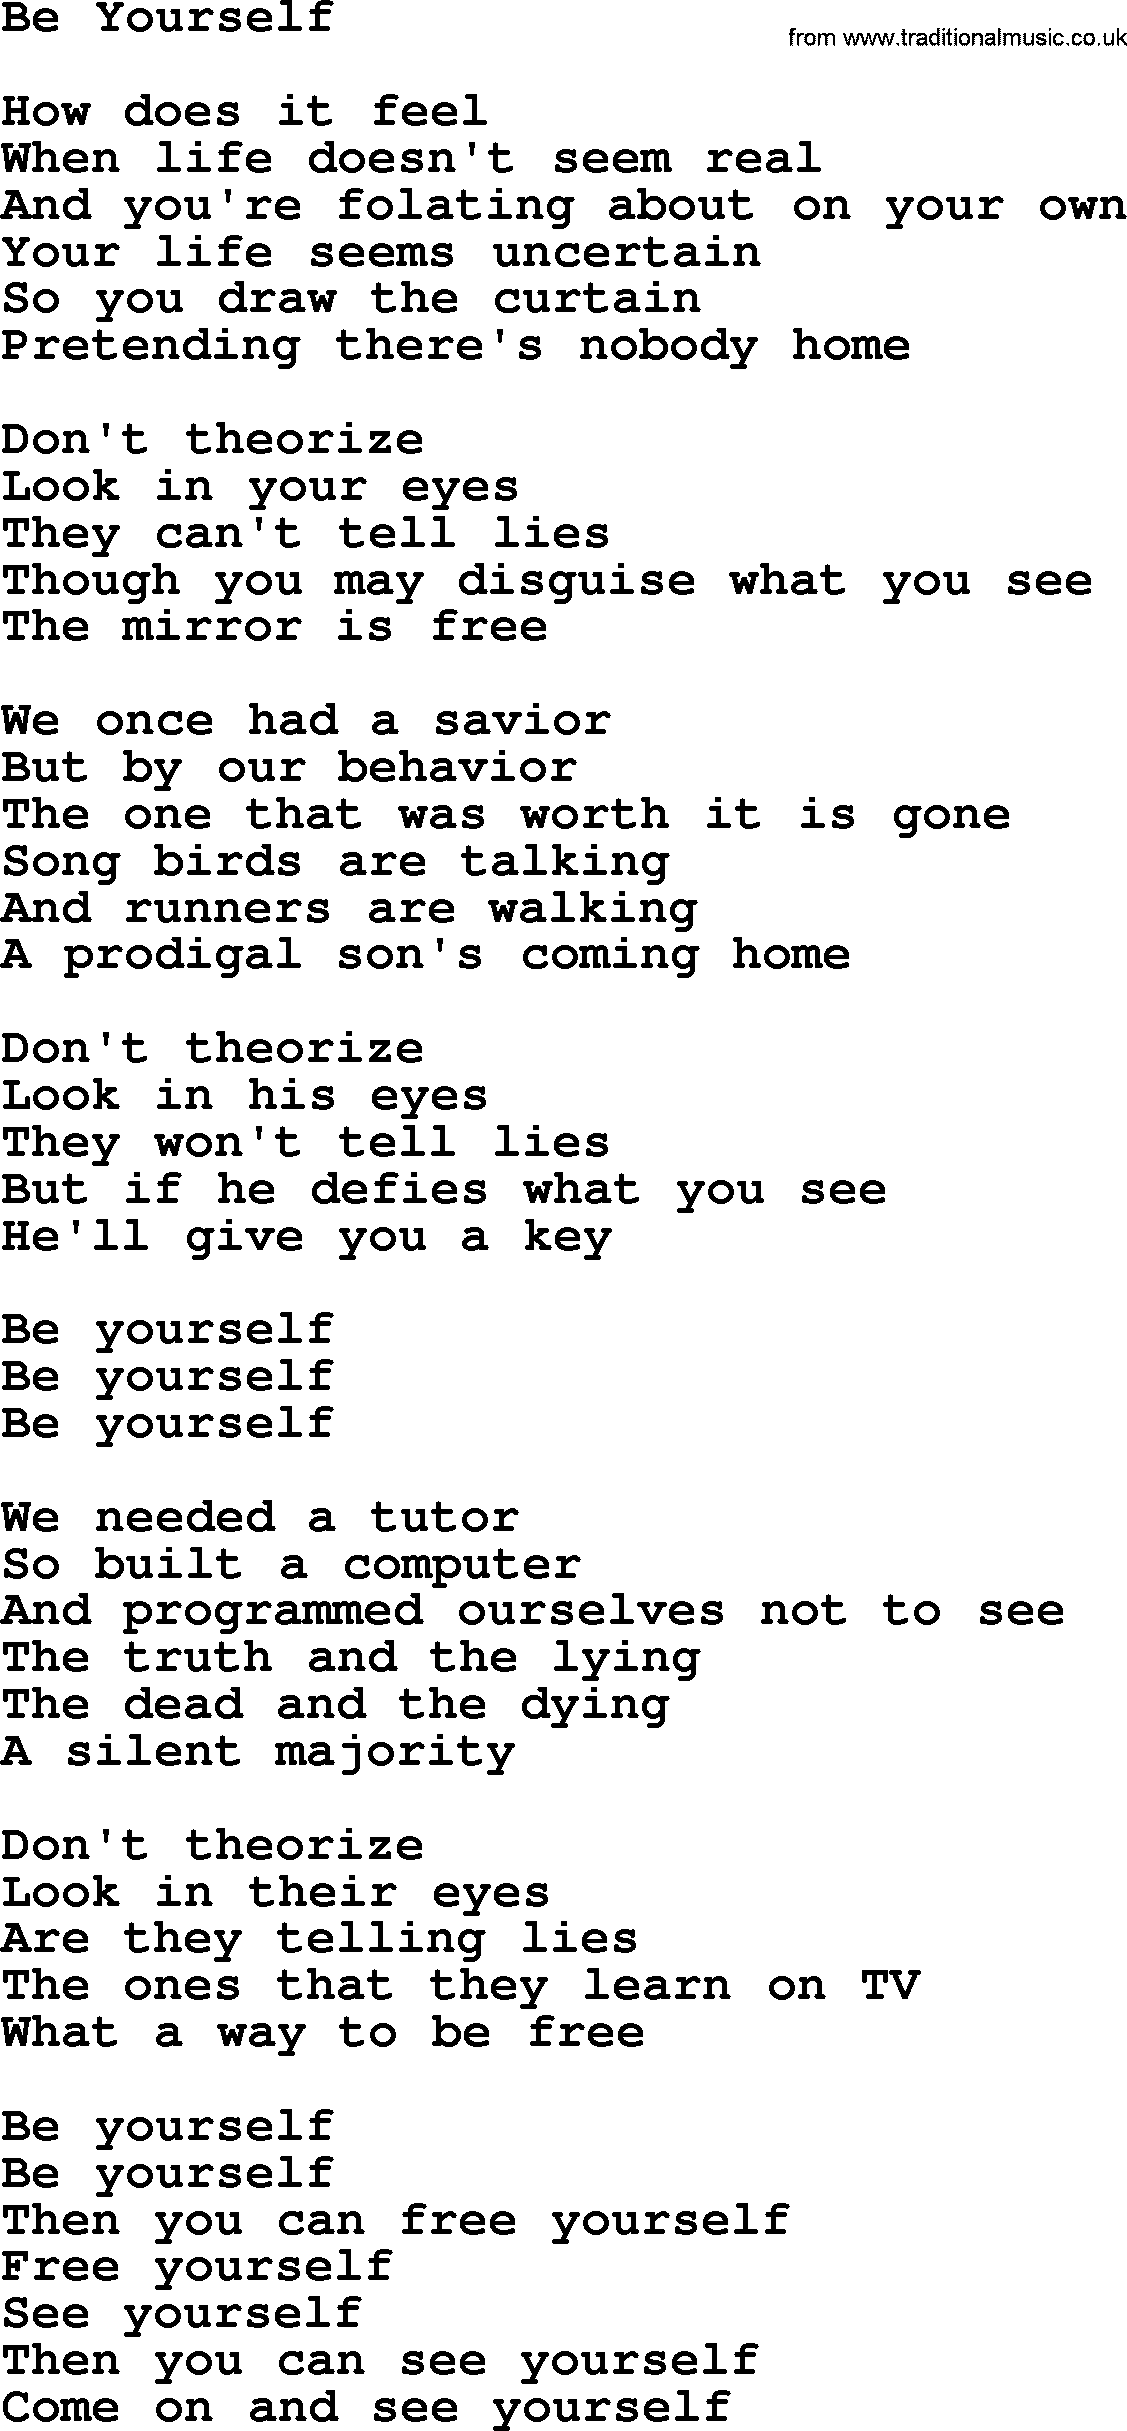 The Byrds song Be Yourself, lyrics